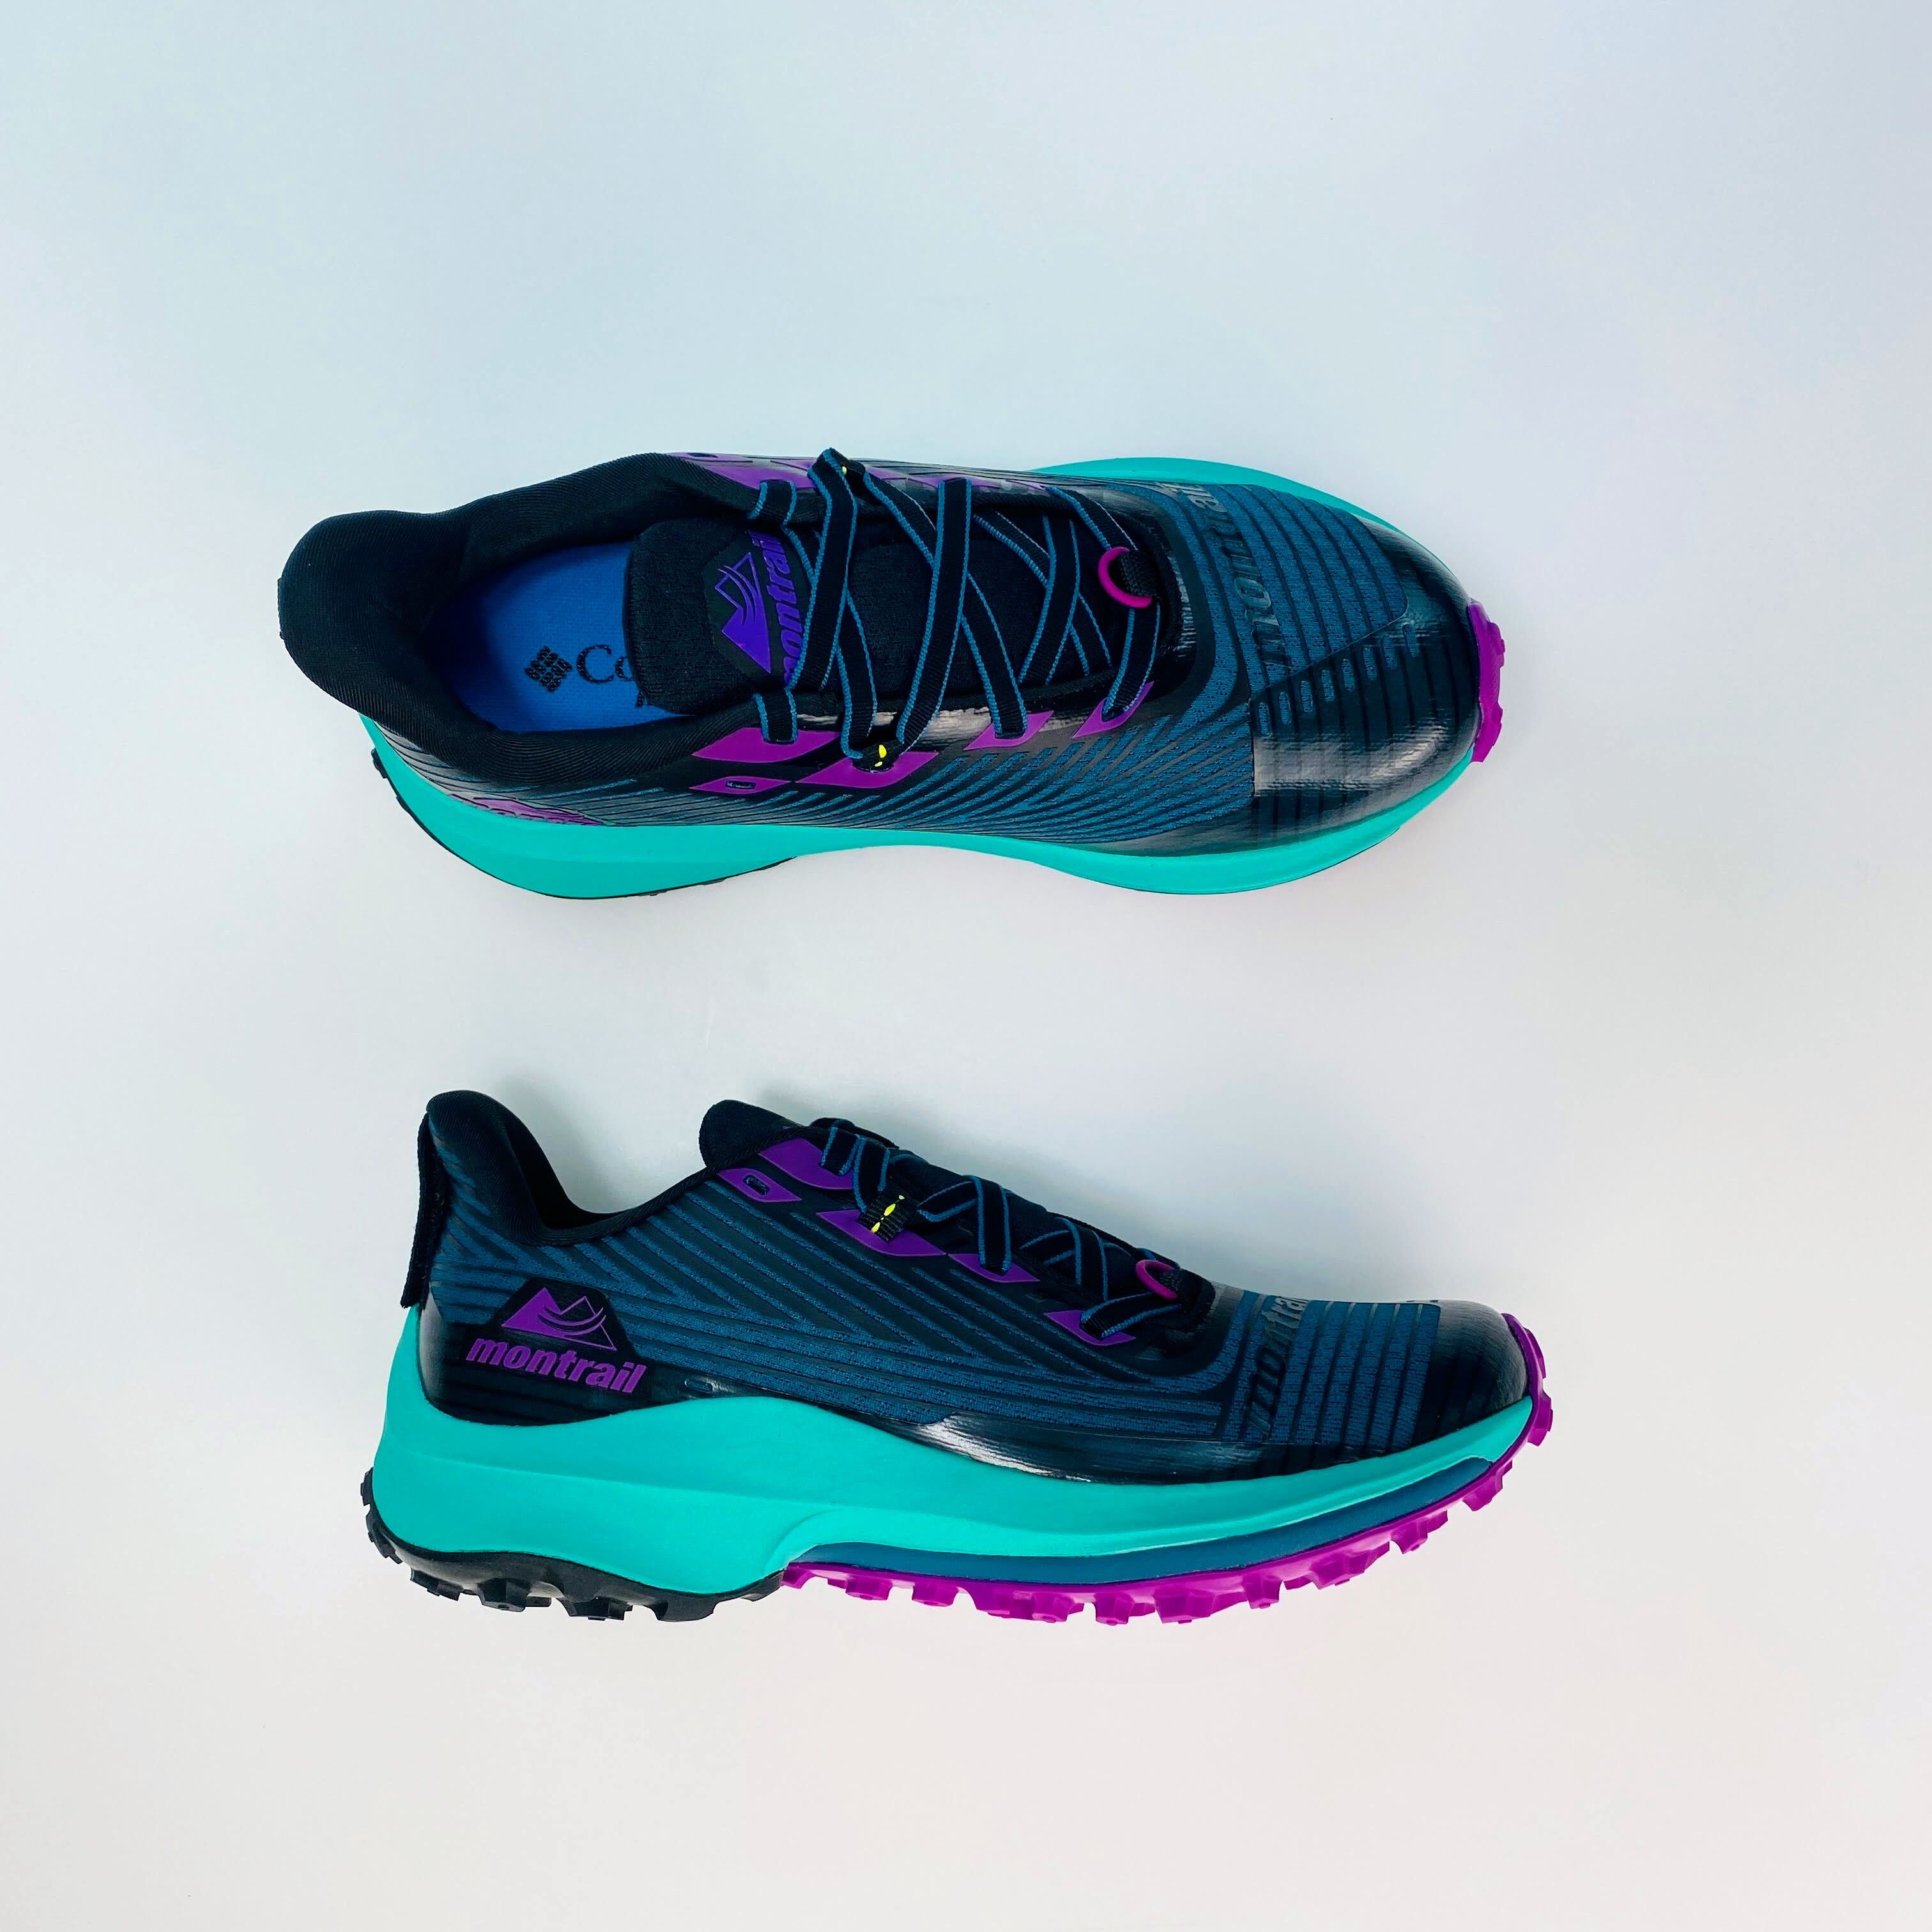 Columbia MONTRAIL™ TRINITY AG™ - Seconde main Chaussures trail femme - Noir - 38 | Hardloop